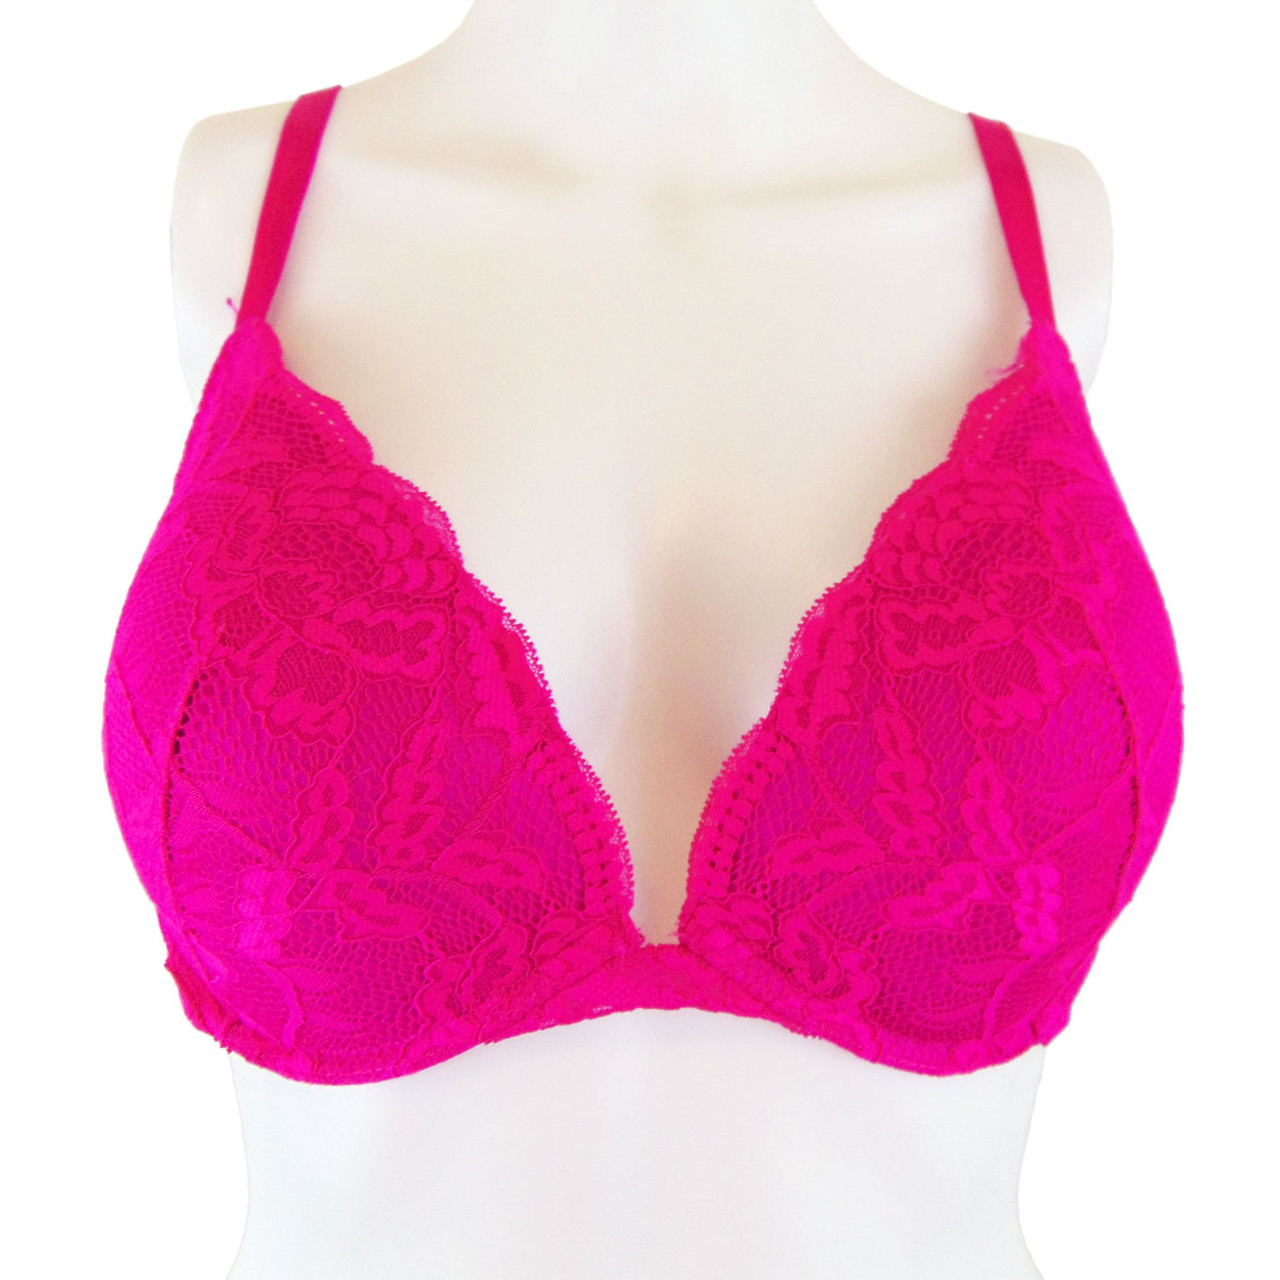 Obsession Dark Pink Lace and Mesh Underwire Bra - Size 36DD